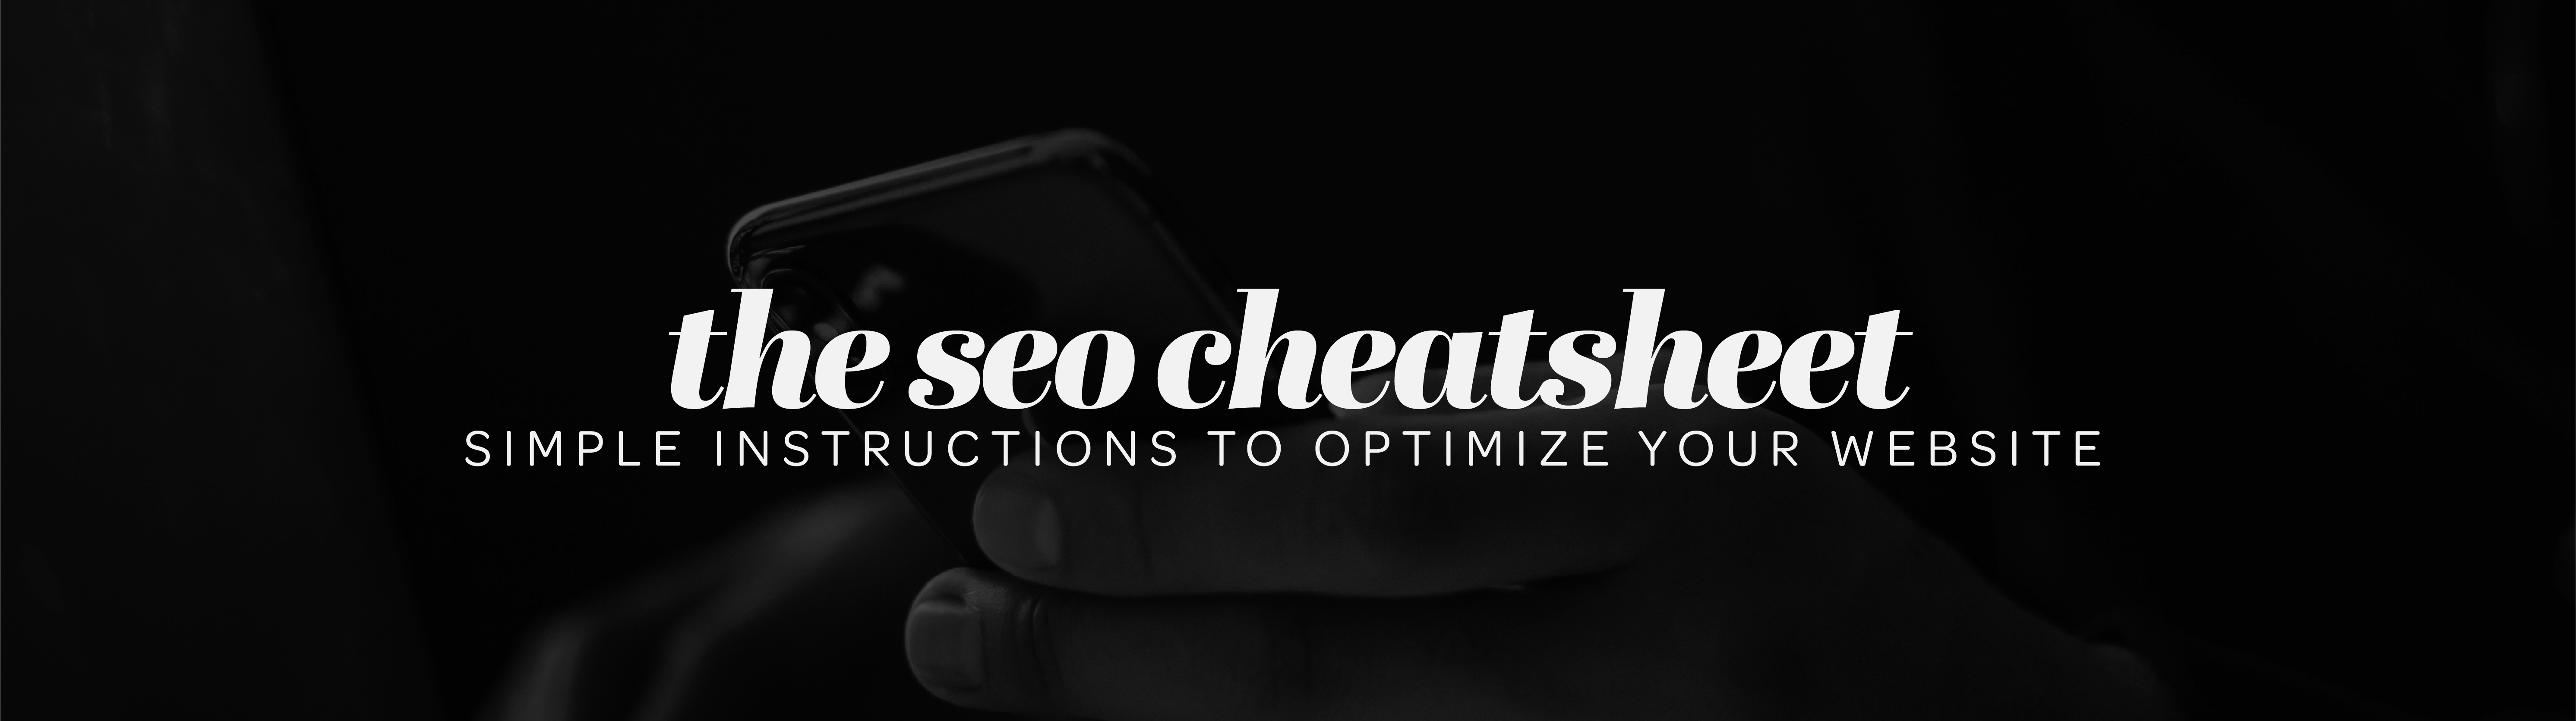 seo cheatsheet learn search engine optimization how do i get to the top of google